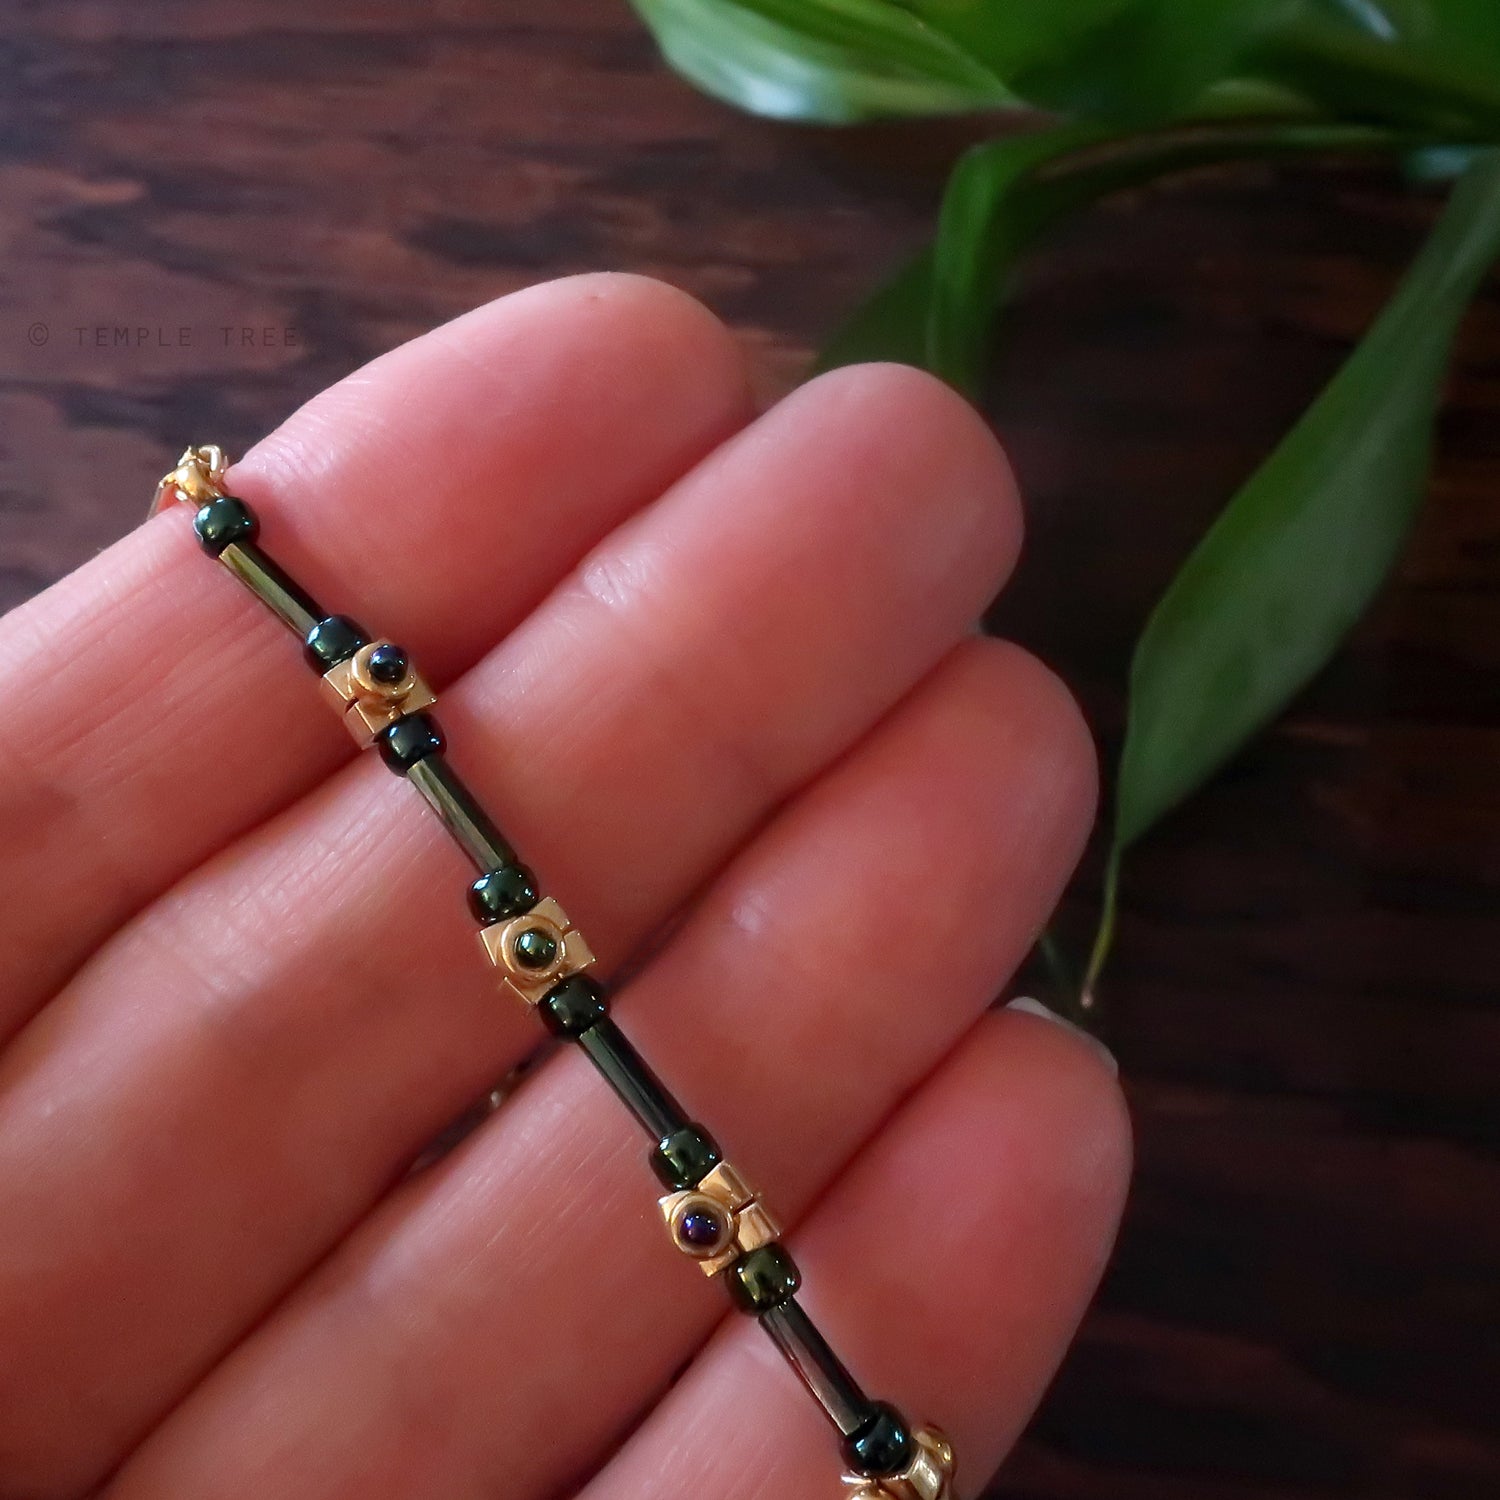 Temple Tree Lost Circuitry Beadwoven Bracelet with Rivets v3 - NeoChrome (gold)